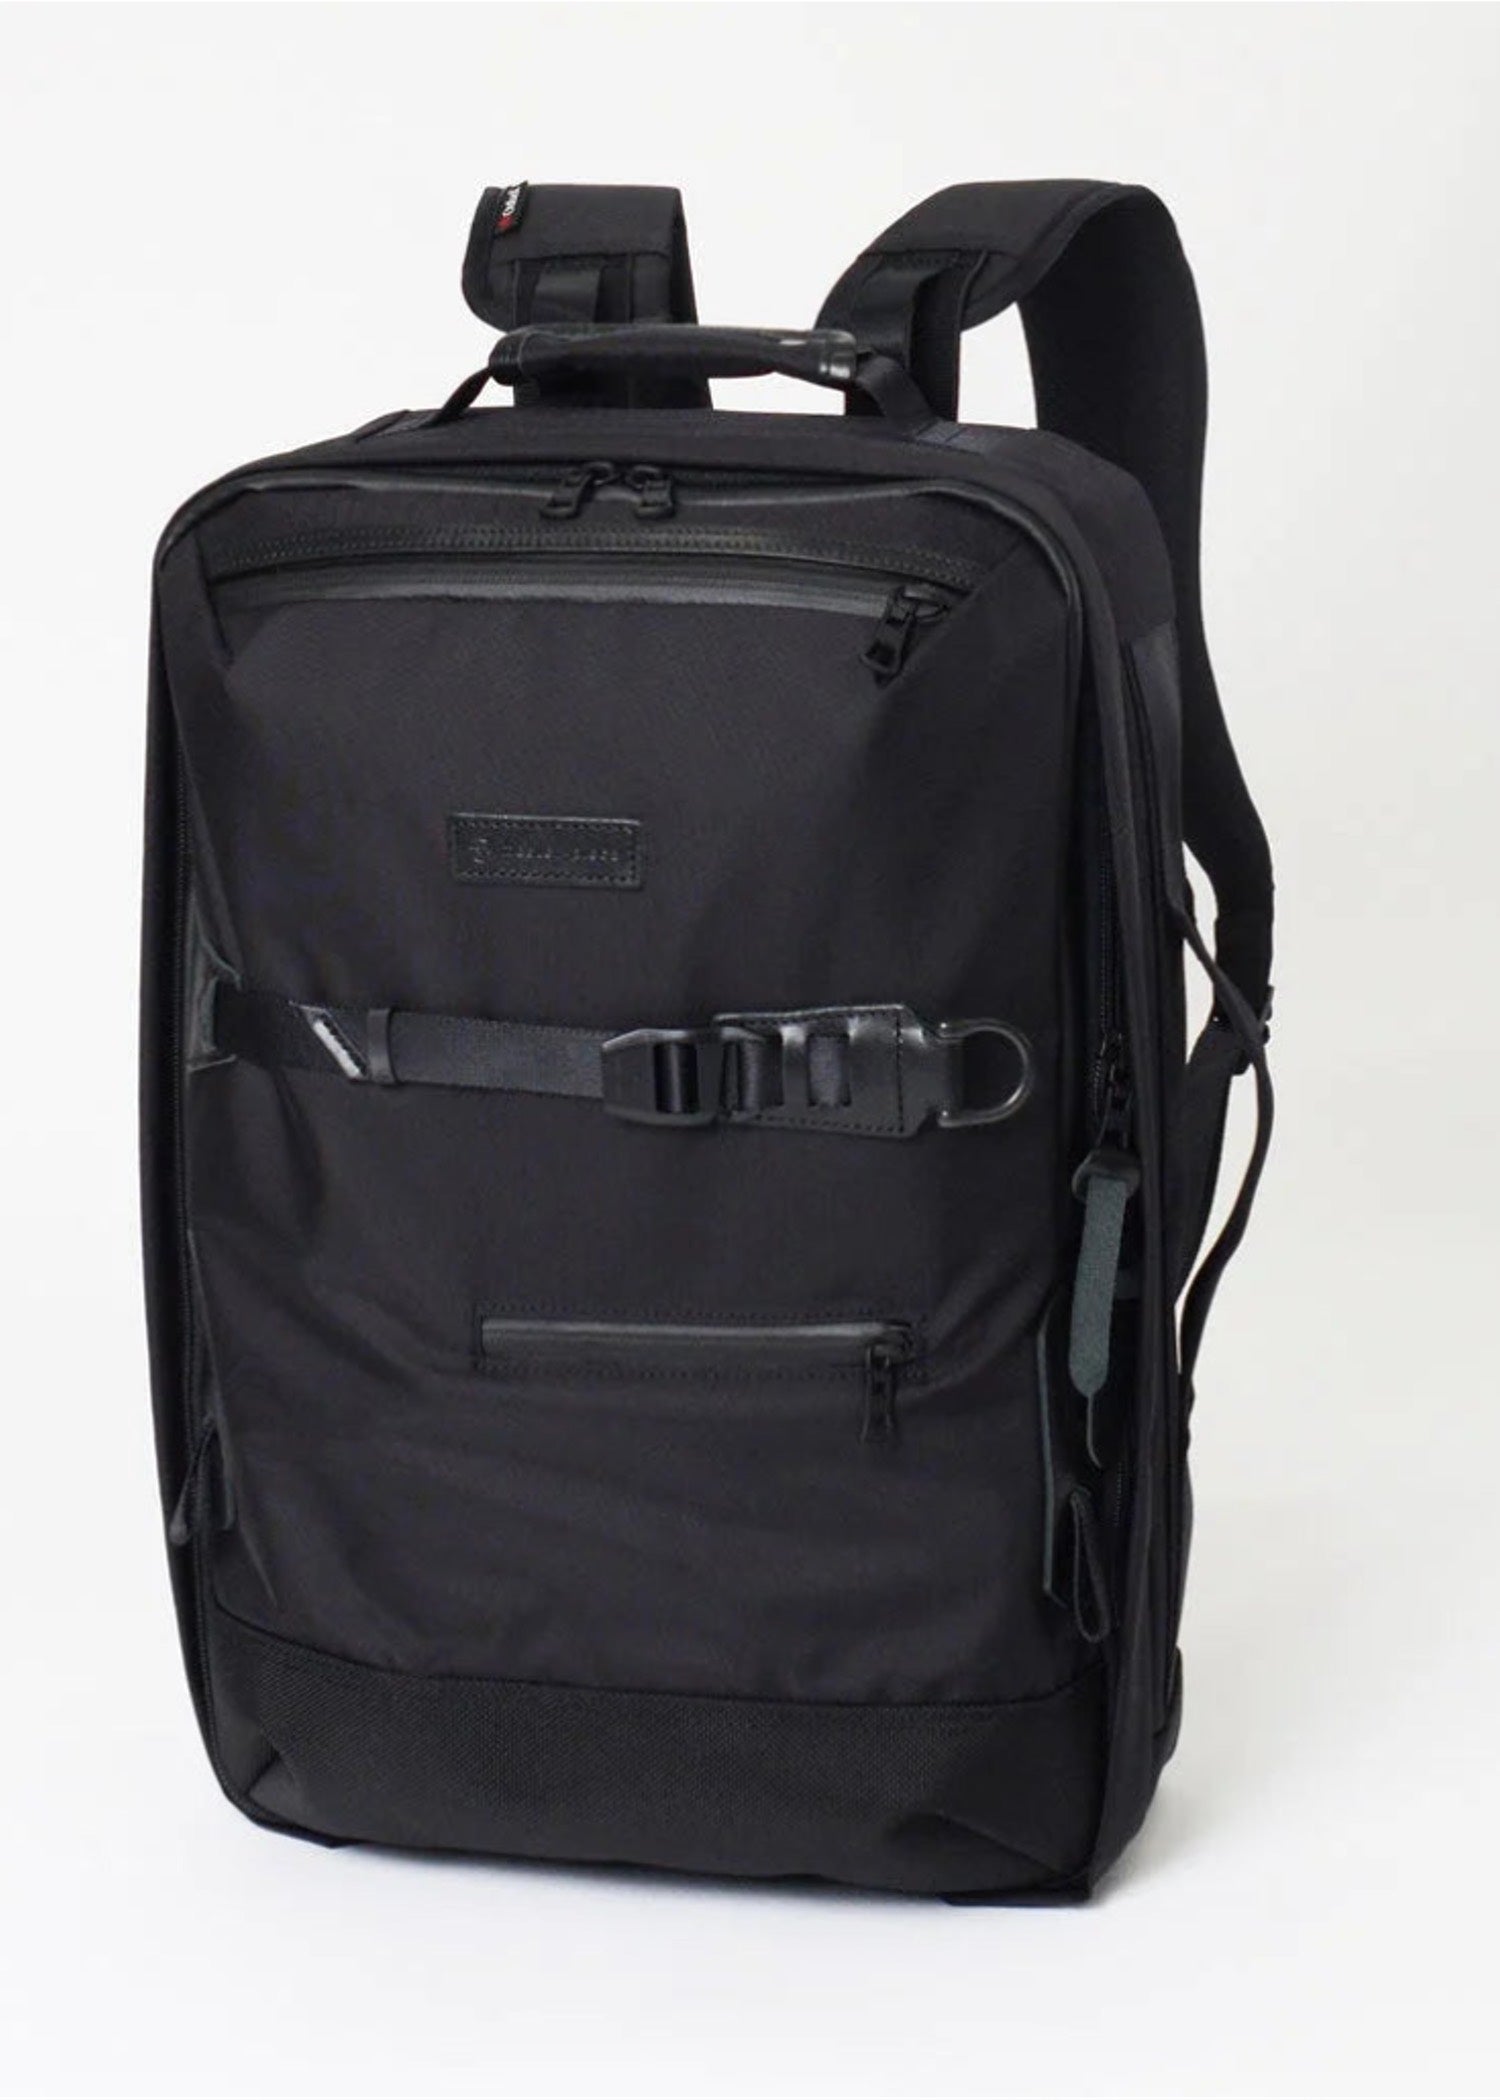 Master-Piece Potential 2 Way Backpack Black - Mildblend Supply Co